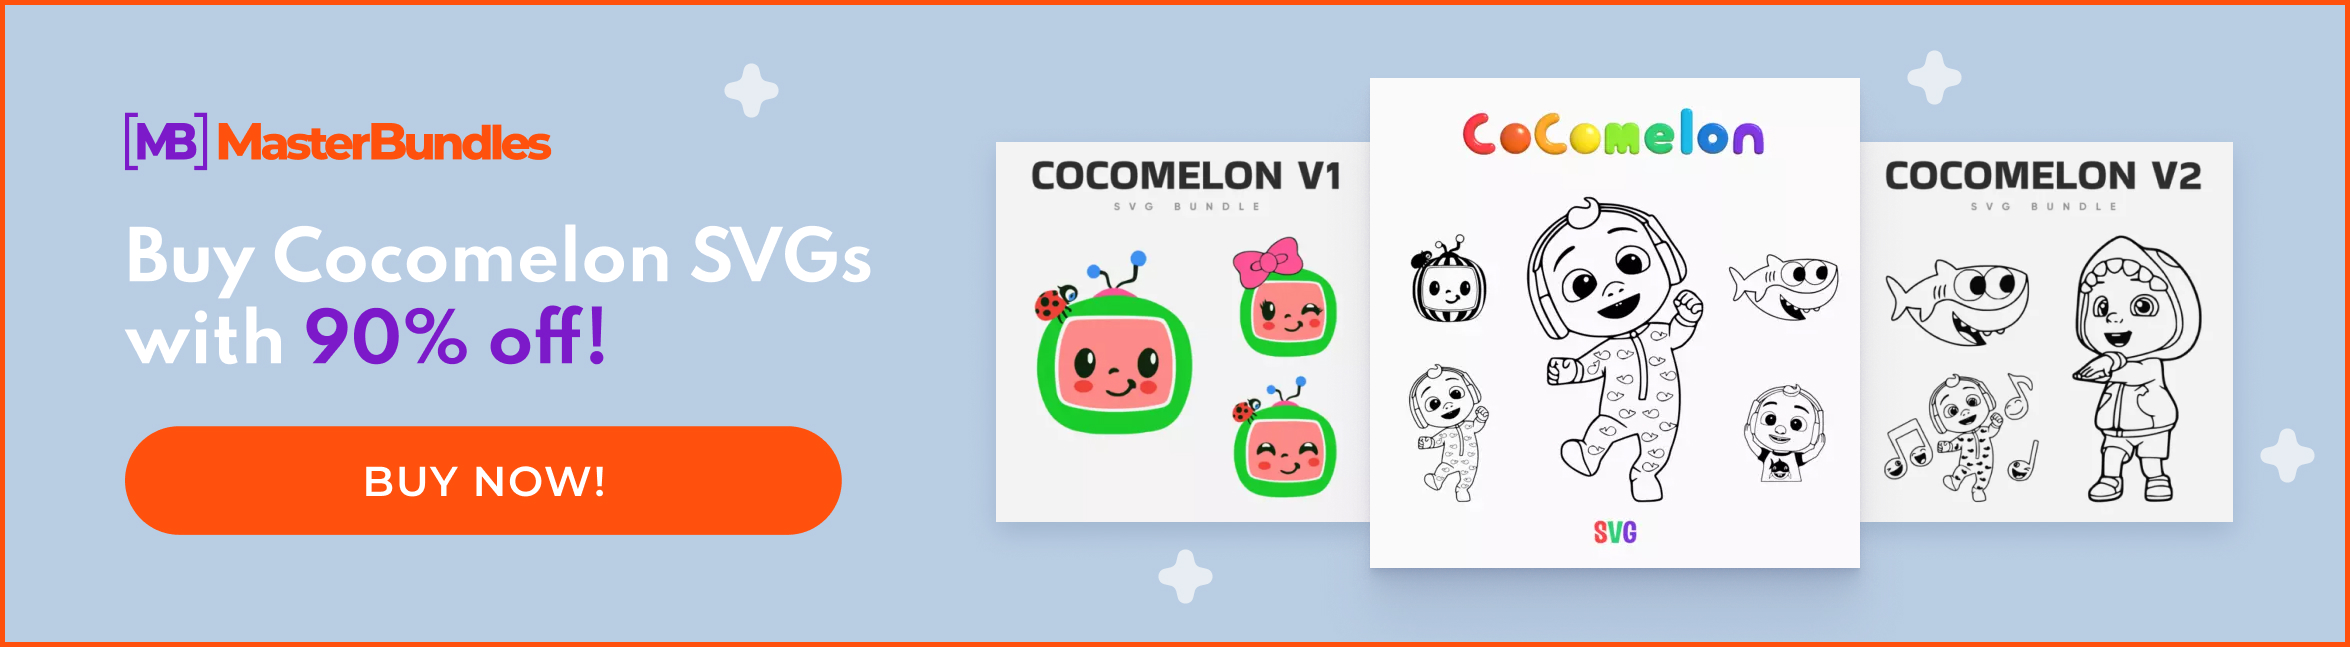 Banner for Cocomelon SVG images.